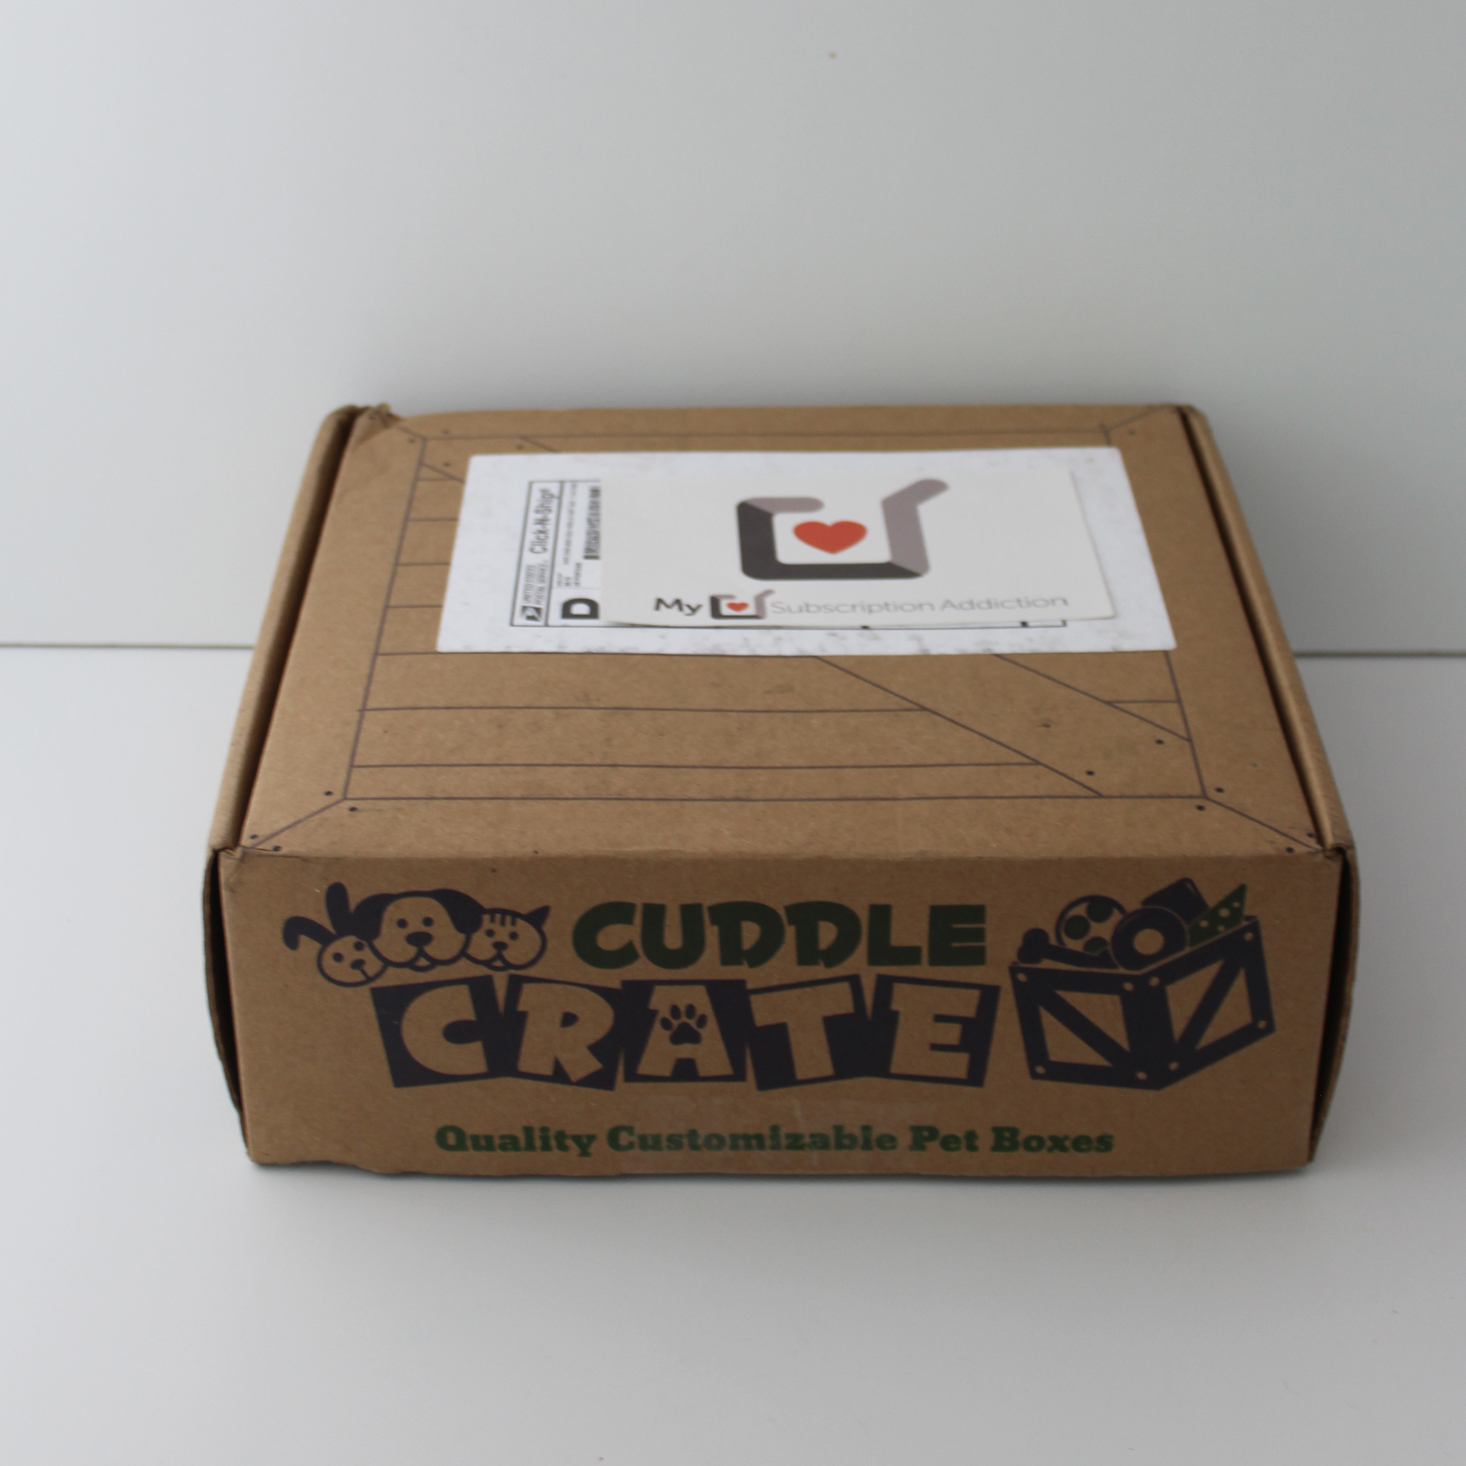 Cuddle Crate Cat Box Review + Coupon – May 2018